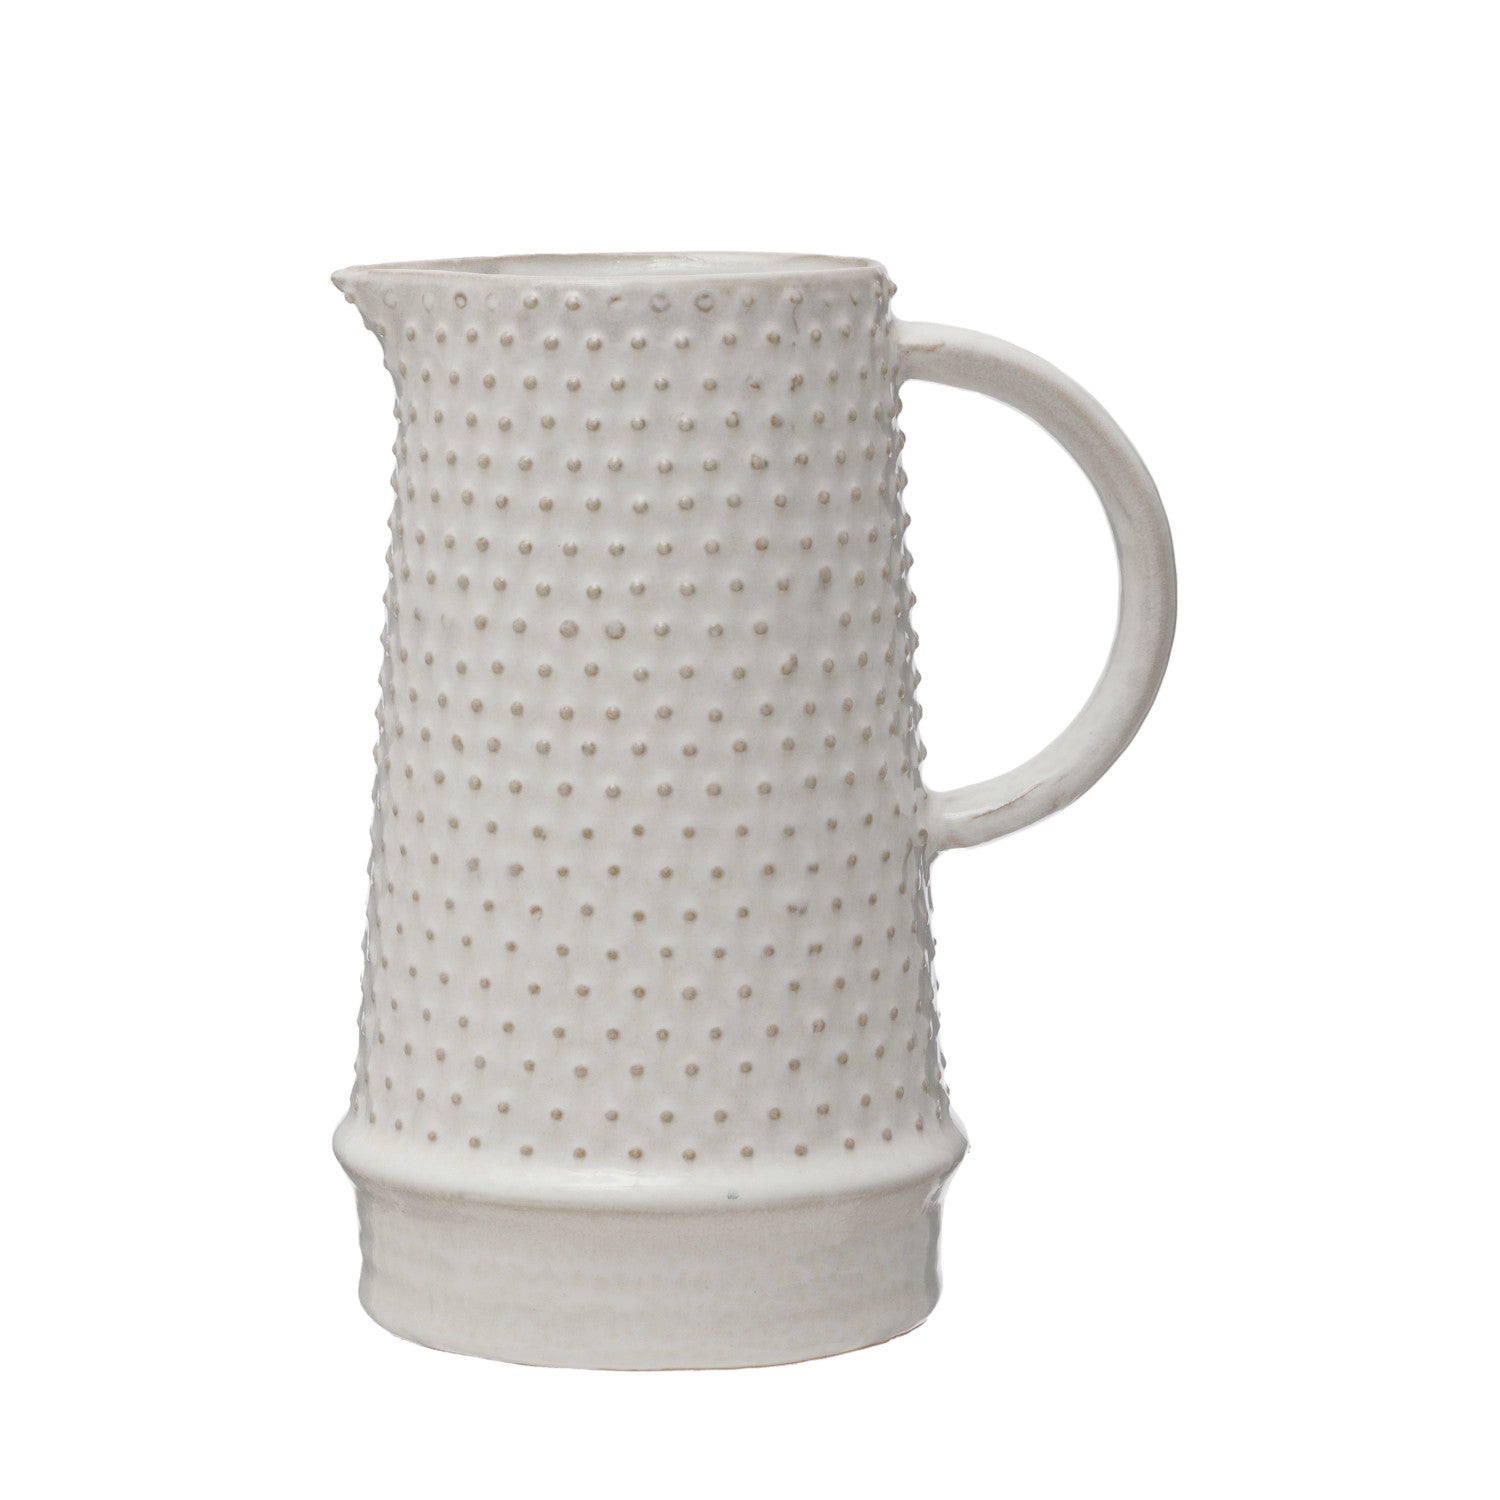 Bloomingville Embossed Stoneware Hobnail Pitcher with Reactive Glaze, 46 oz.